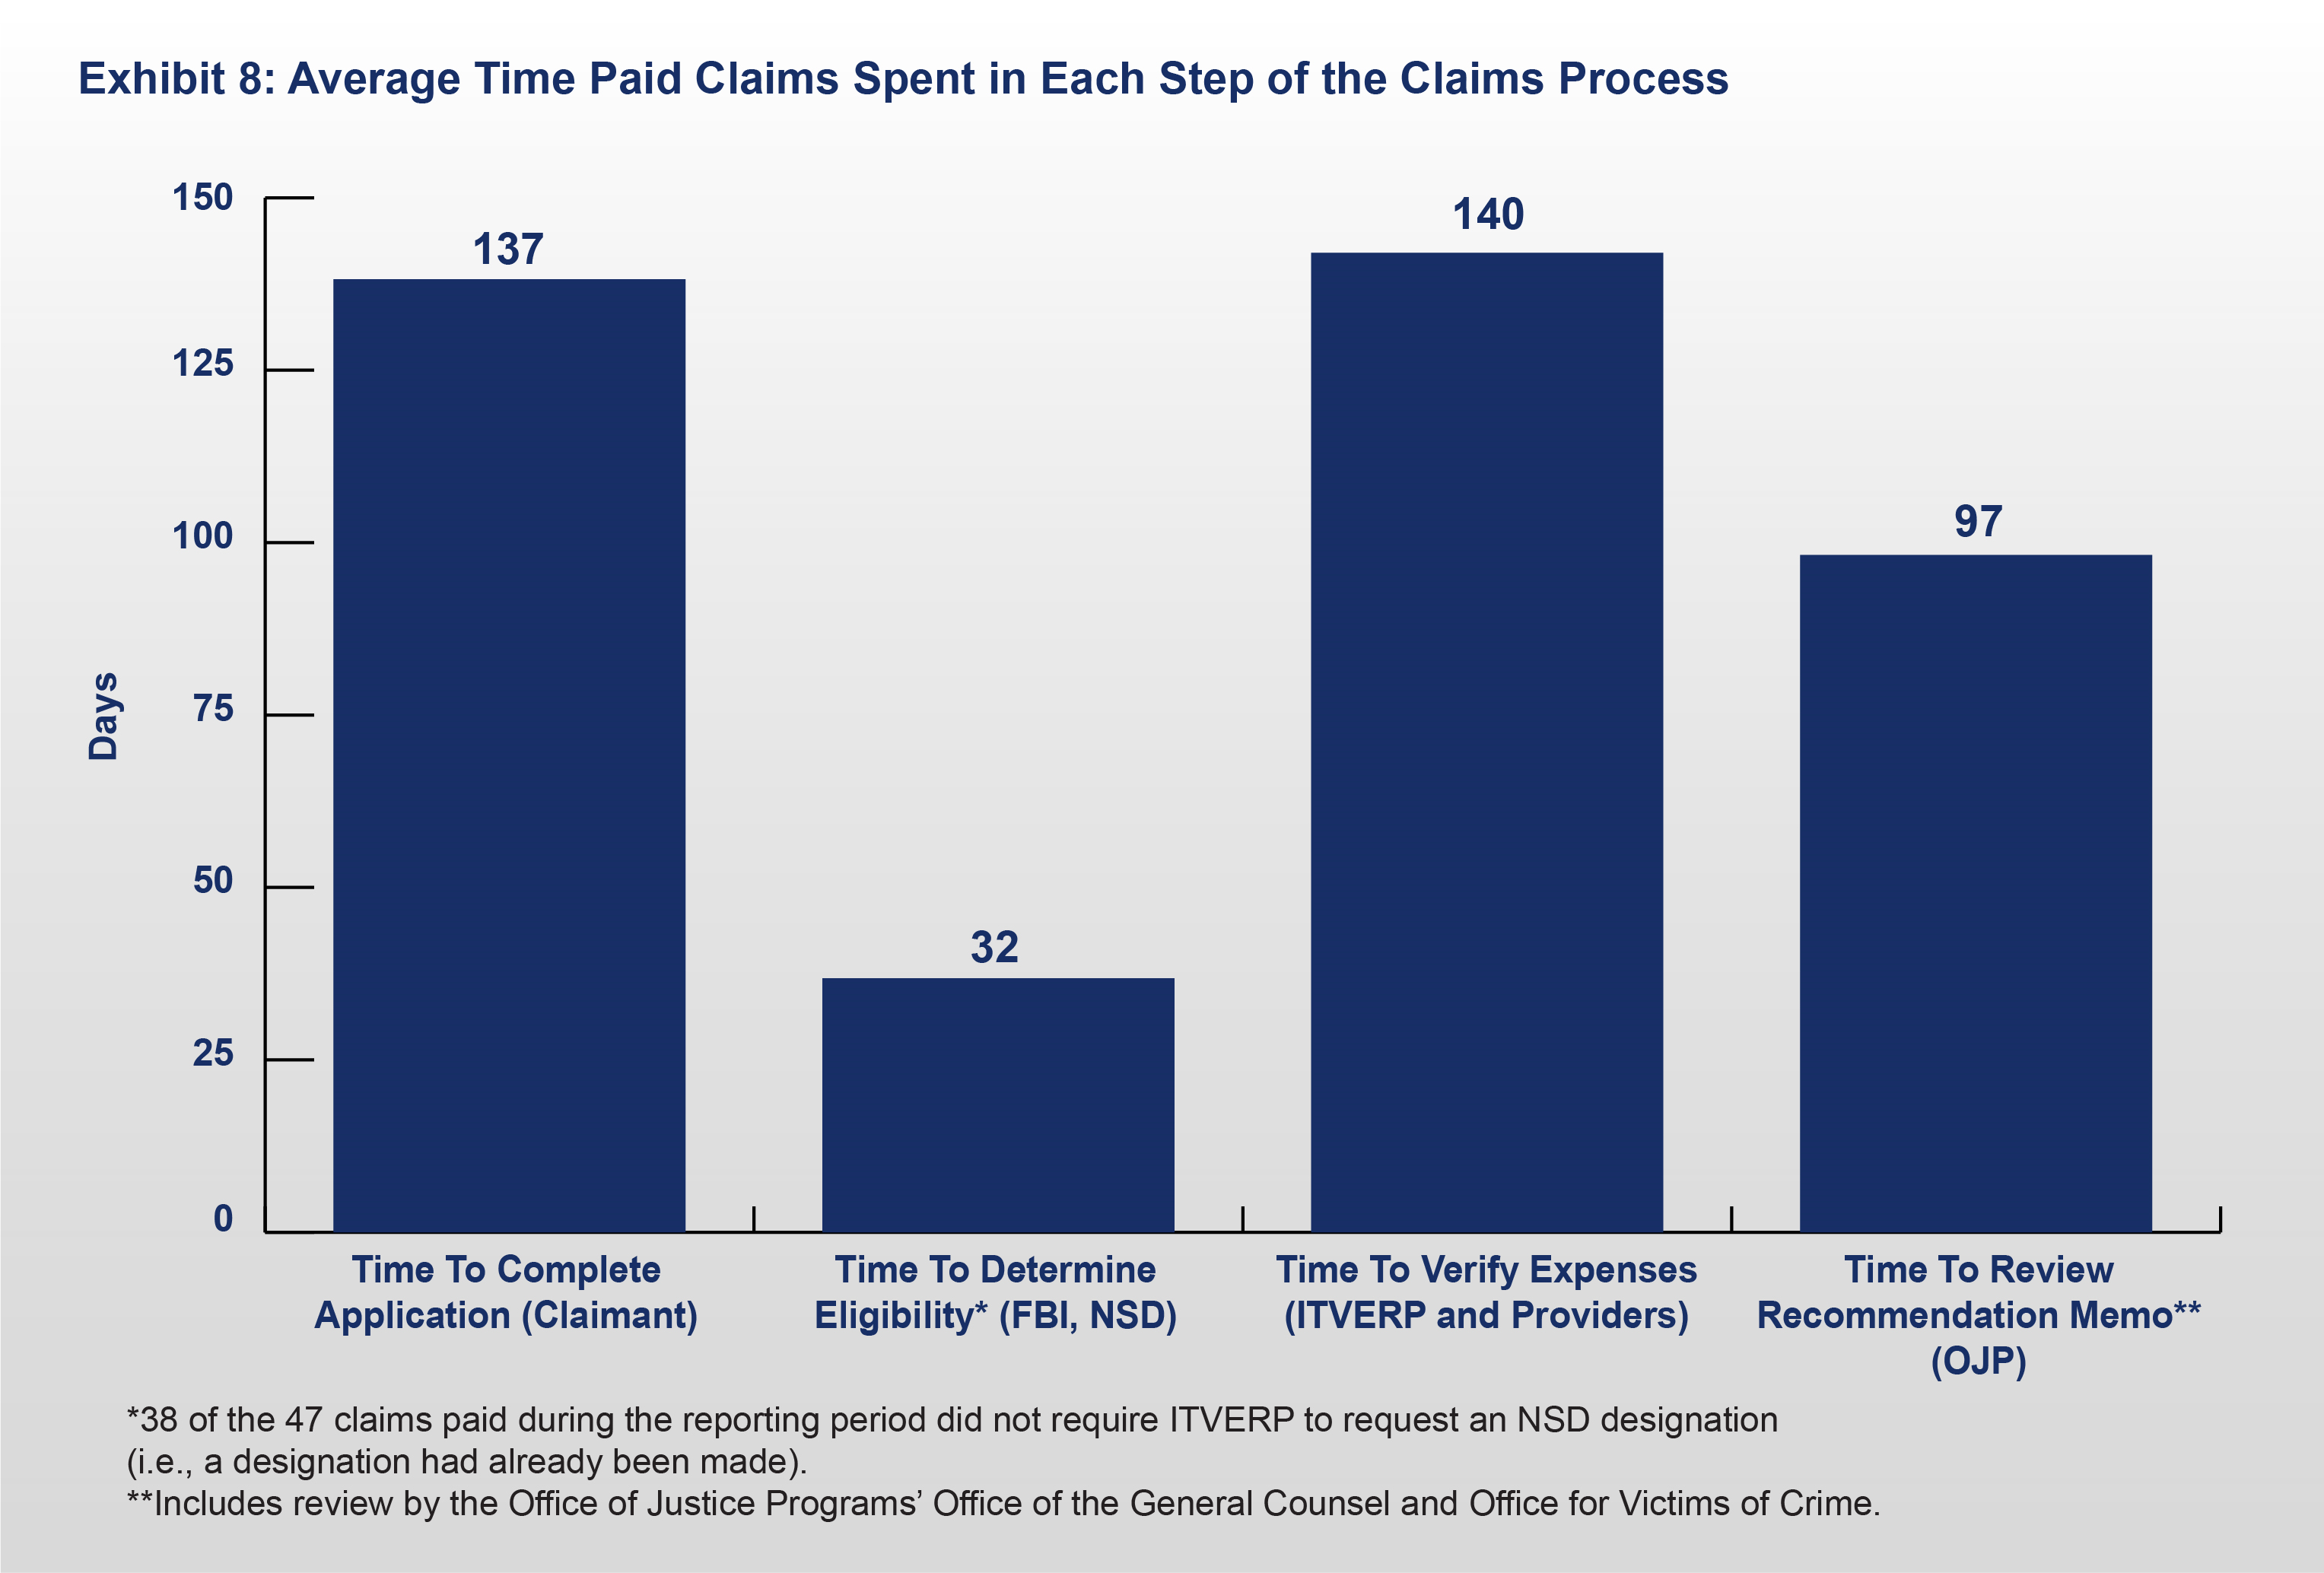 Exhibit 8: Average Time Spent Processing ITVERP Paid and Denied Claims